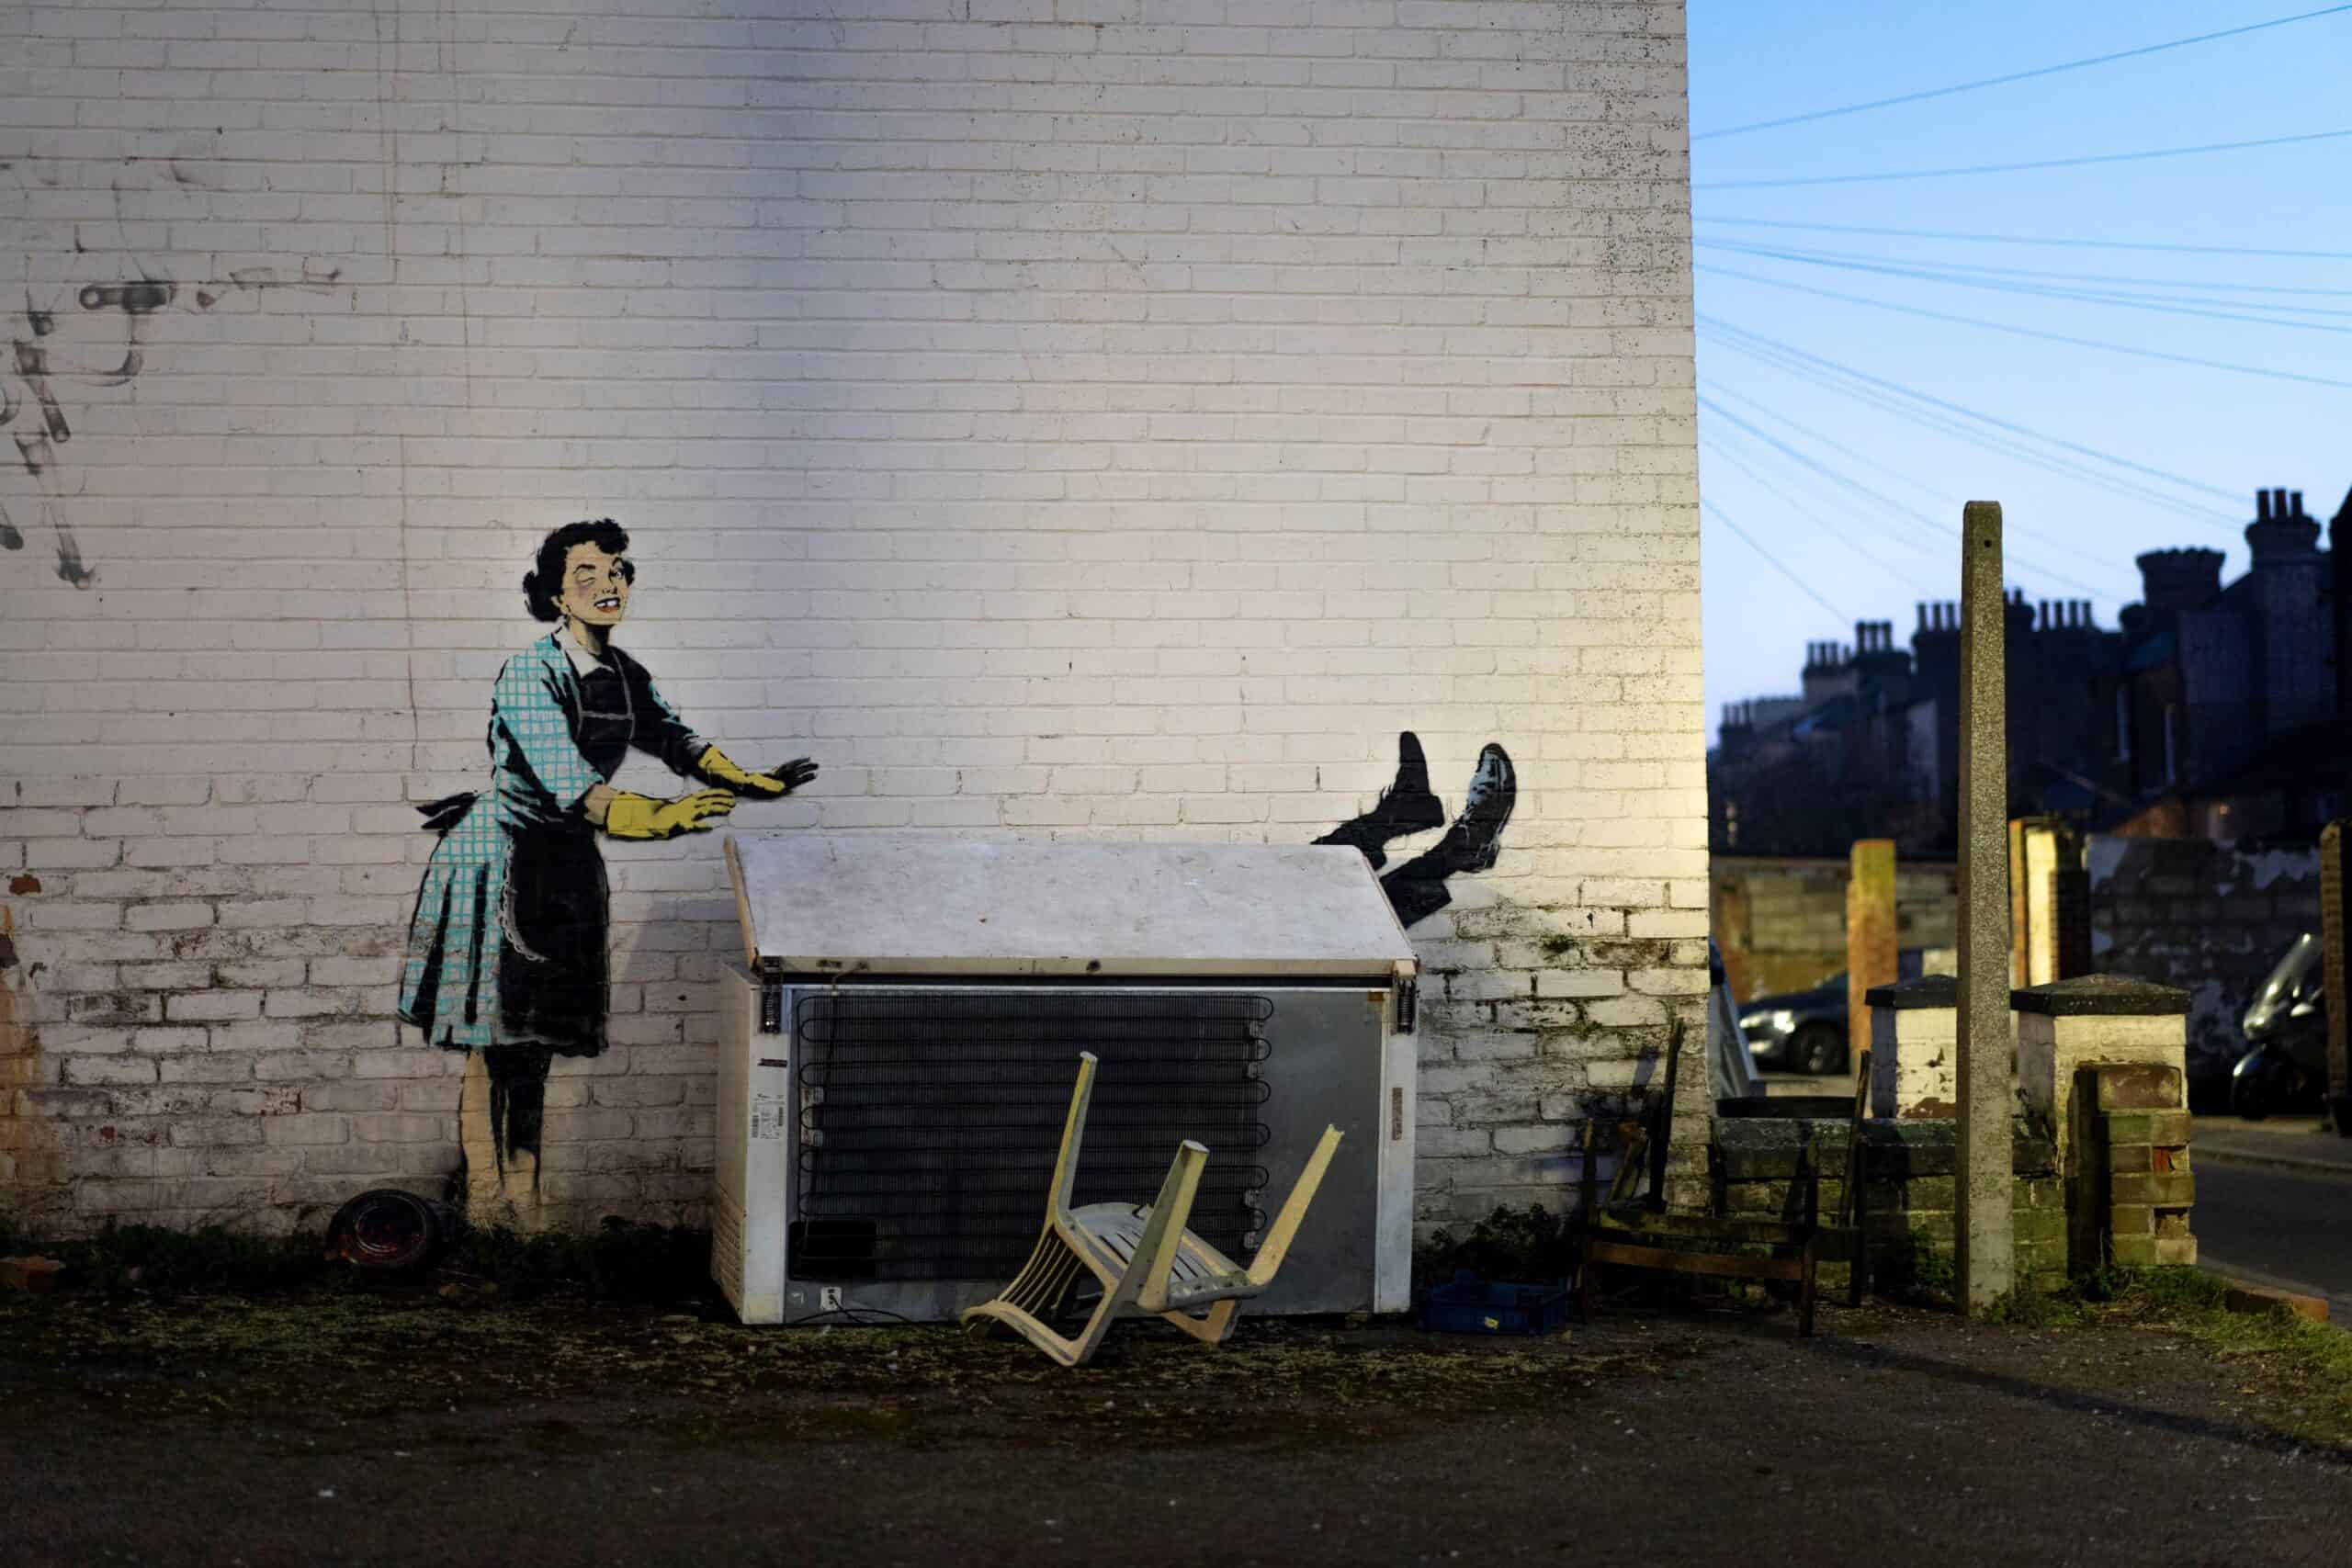 Banksy confirms Valentine’s Day artwork depicting themes of domestic was him